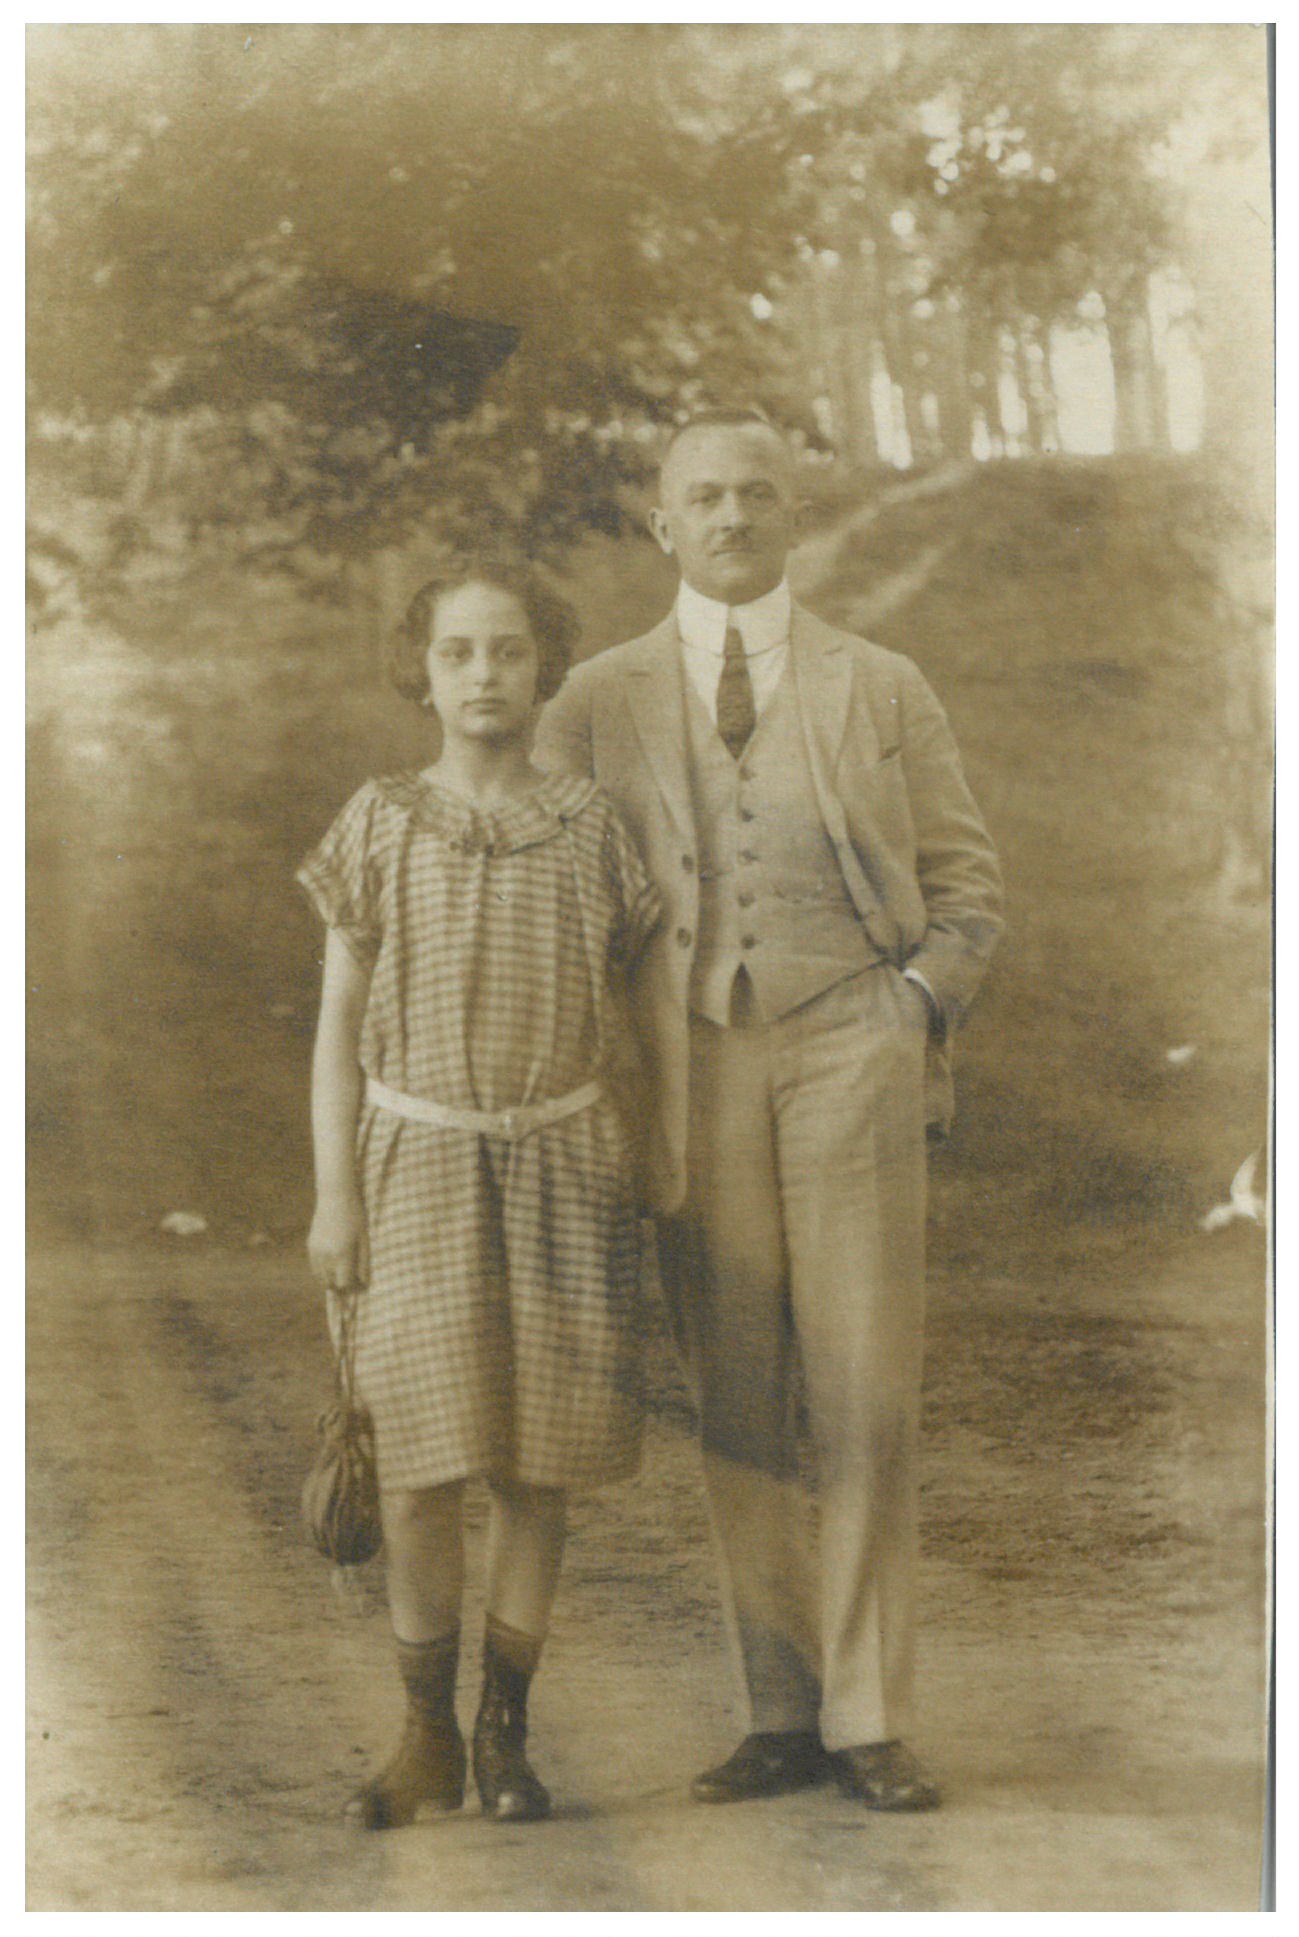 Martin Lachmann and his daughter Ruth, the mother of Peter Haas